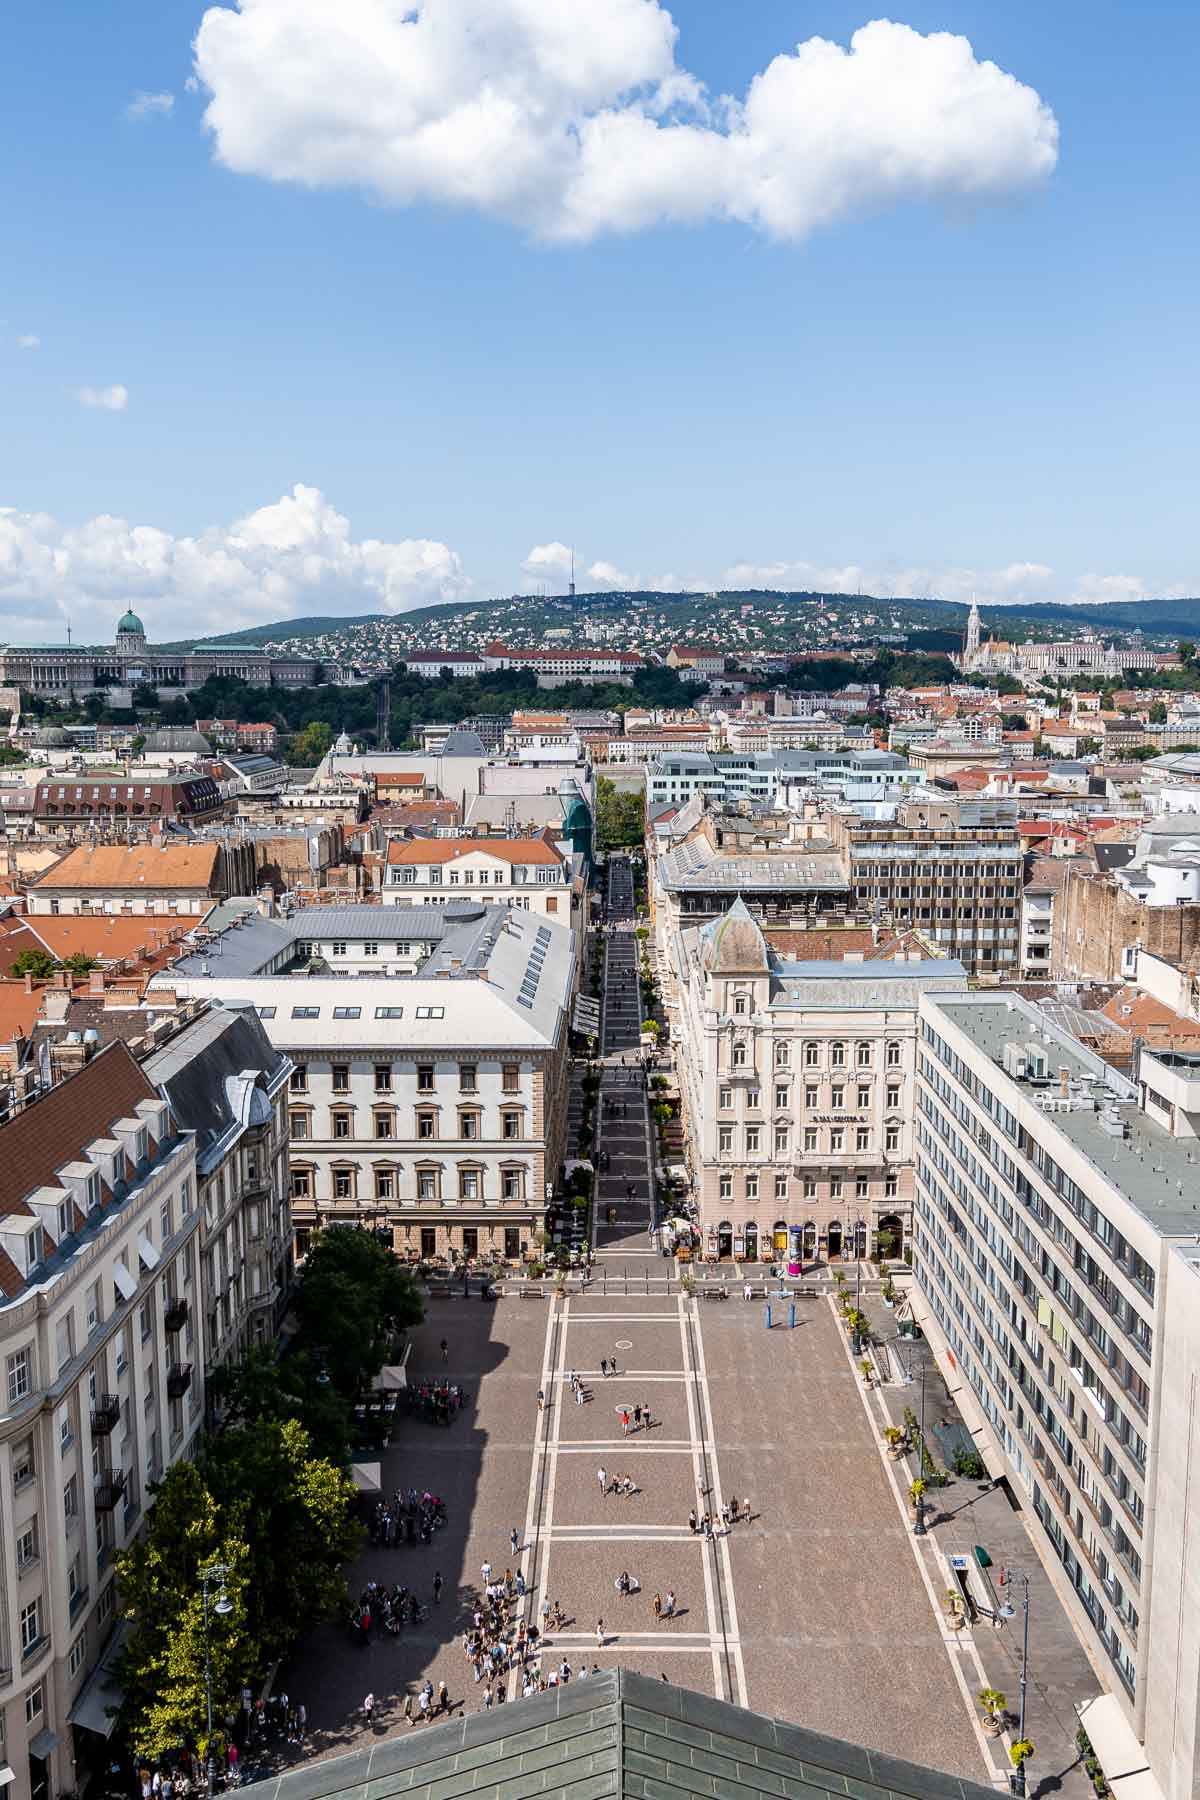 View of the St. Stephen Square and the city of Budapest from the St. Stephen Basilica